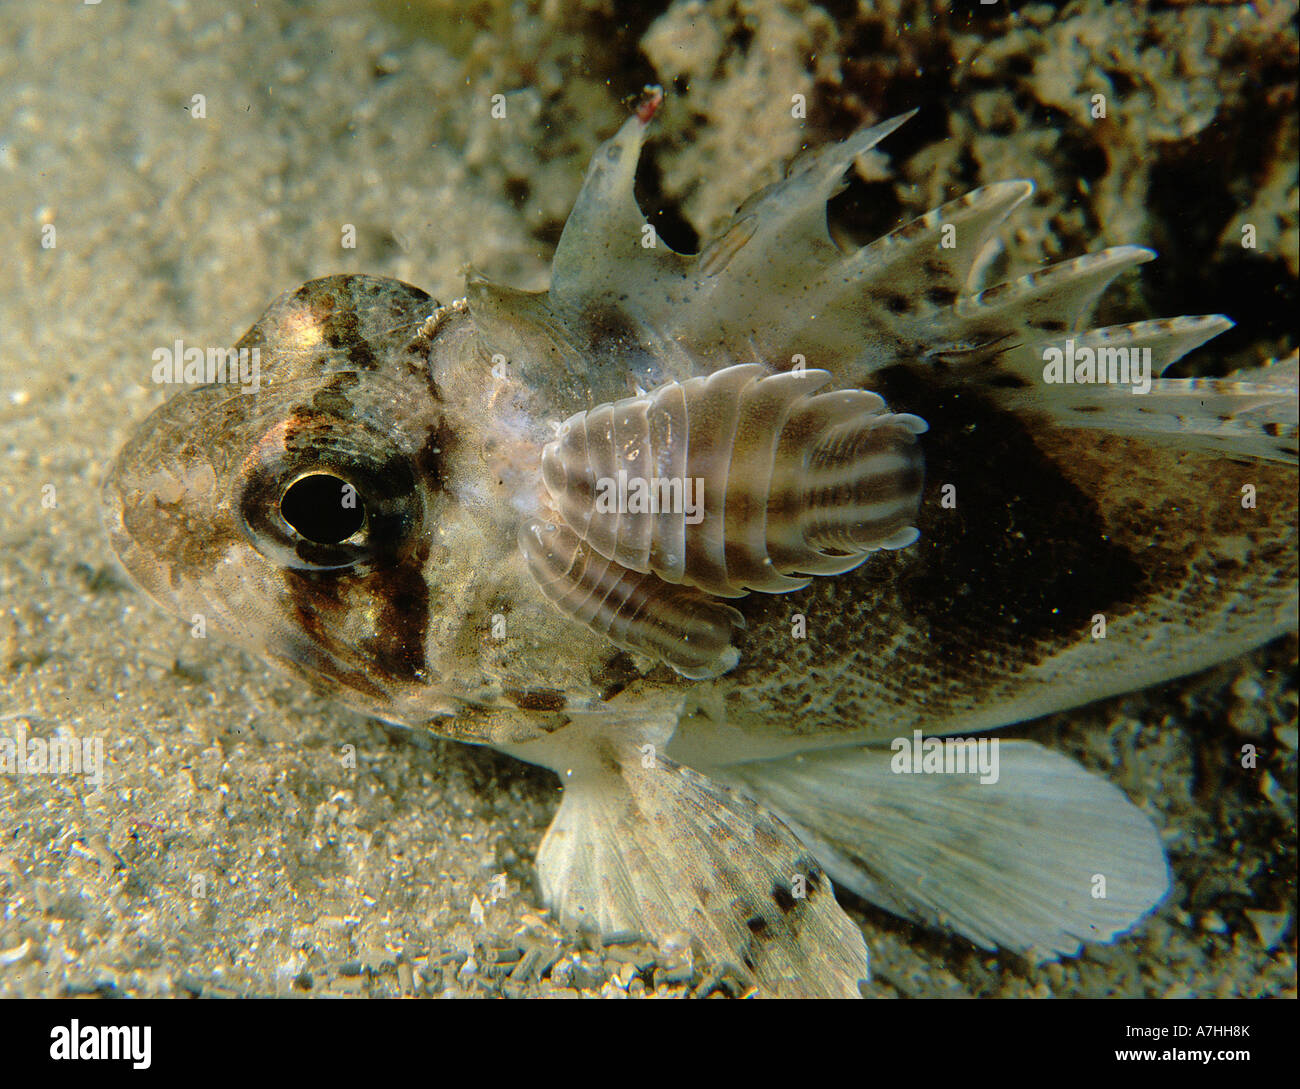 Fortescue Centropogon australis with parasitic isopods attached Jervis Bay New South Wales Australia Stock Photo